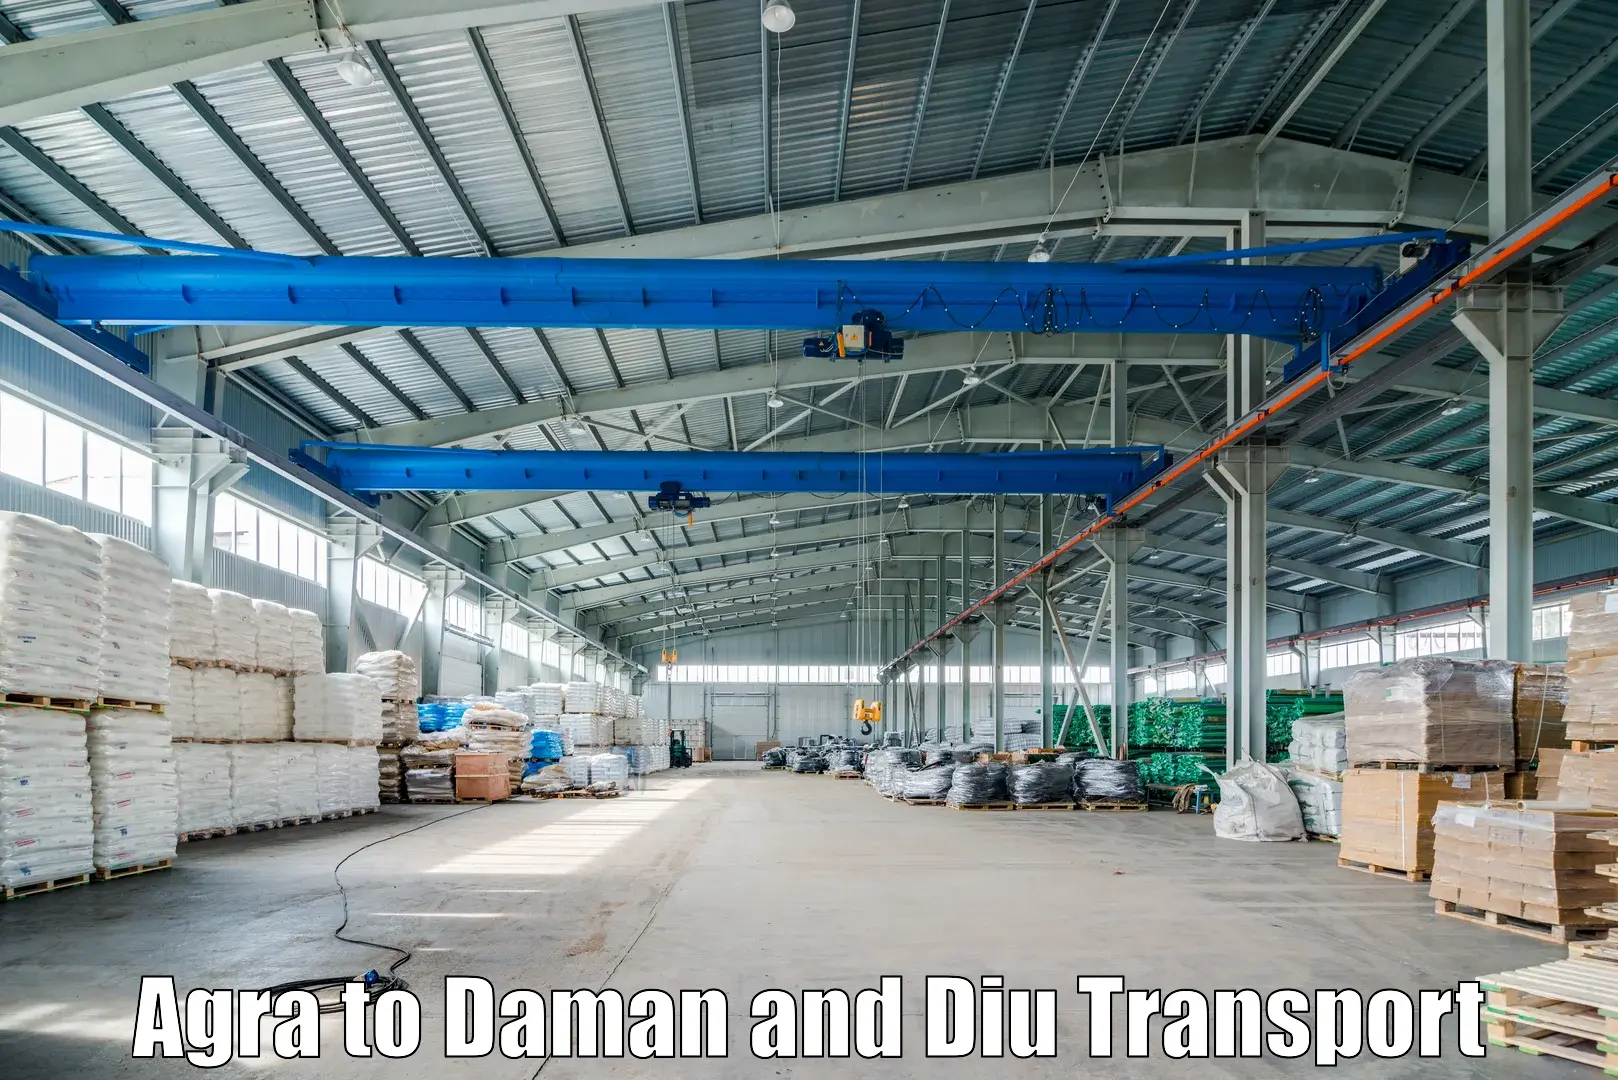 Land transport services Agra to Daman and Diu